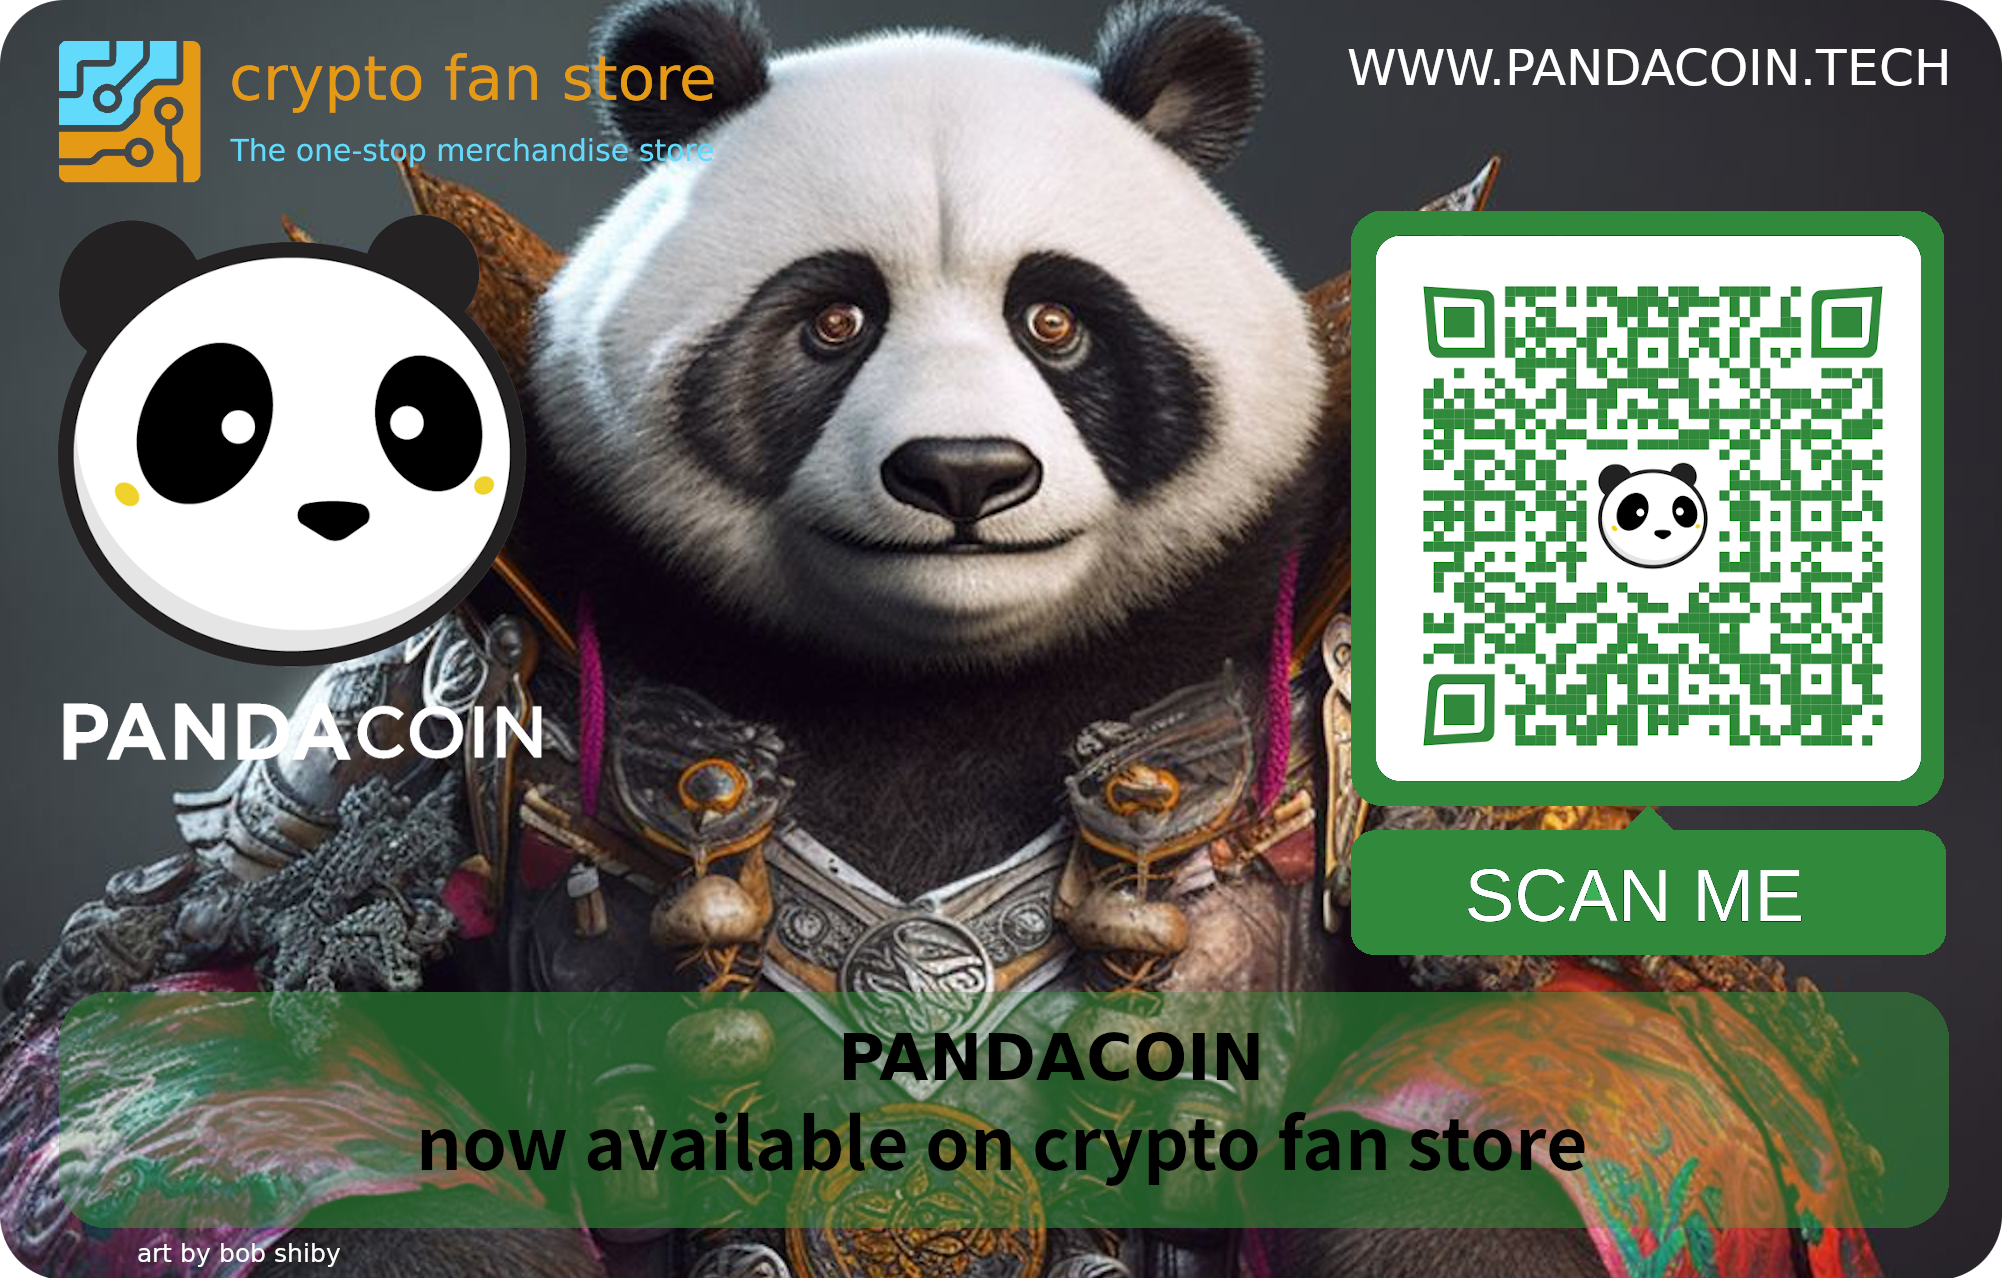 You are currently viewing Pandacoin Merchandise now available